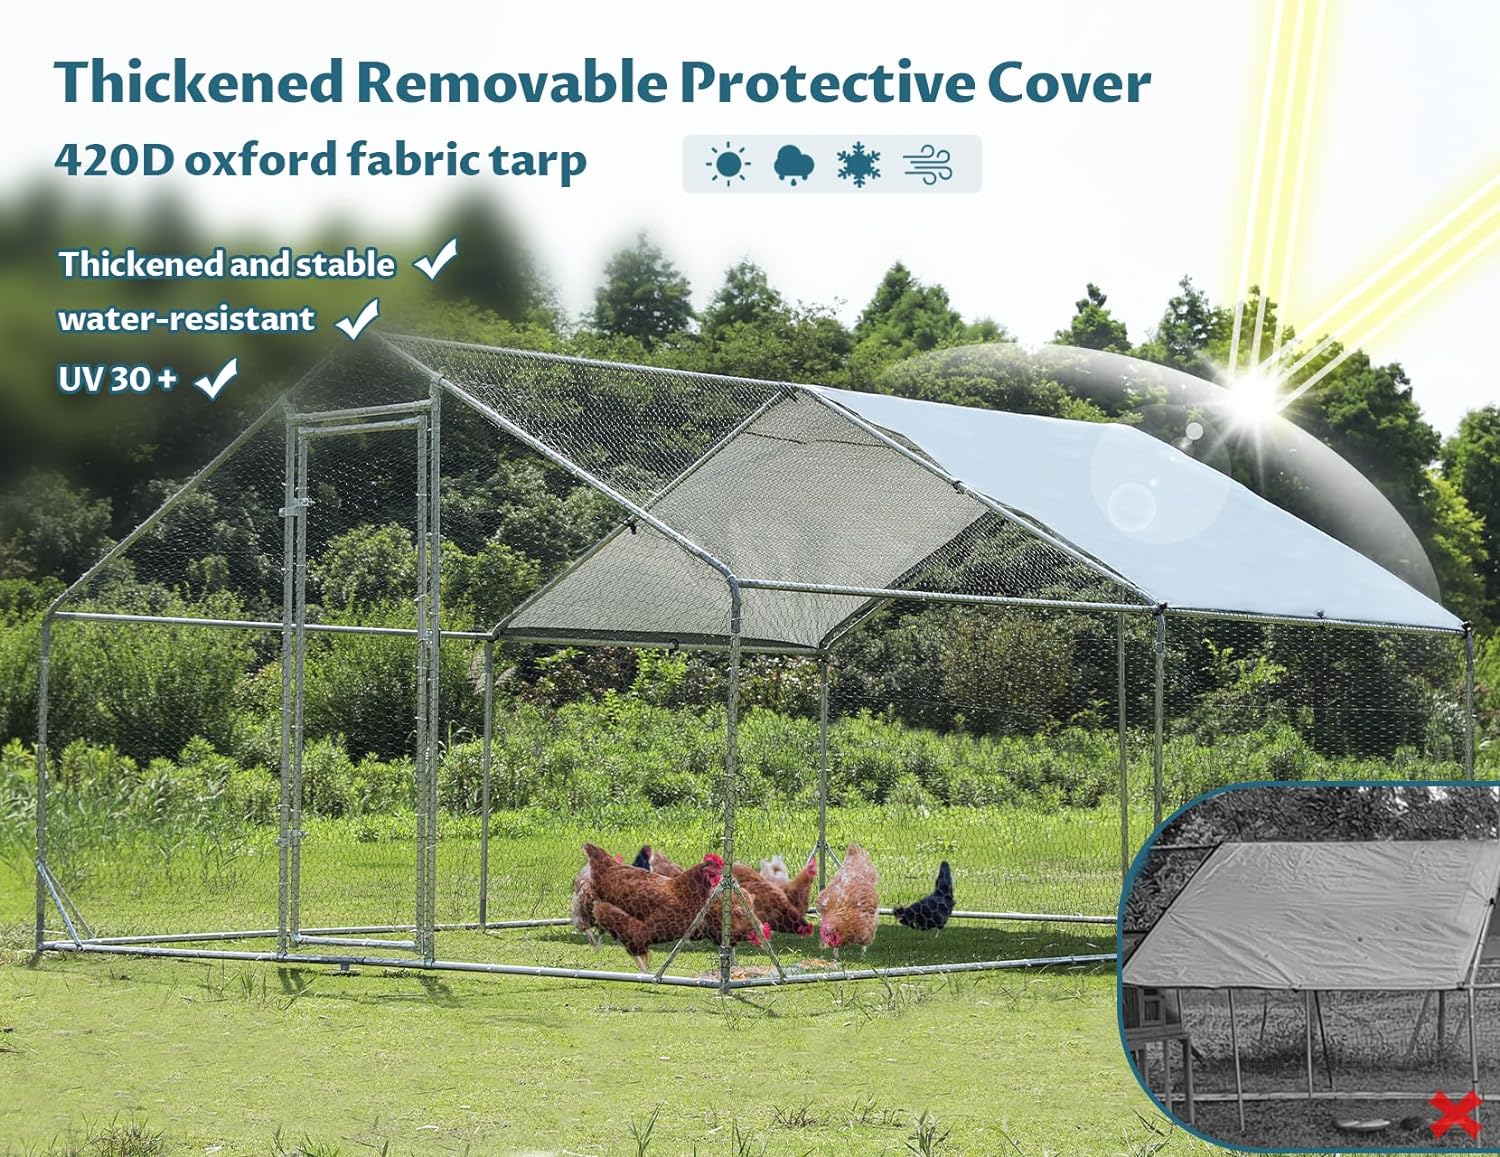 PETSFIT Metal Chicken Coop with Anti-Rust Durable Steel & 420D Anti-Ultraviolet Waterproof Cover, Large Walk-in Poultry Cage Chicken Run Duck House for Outdoor Farm Use(118"x158"x76.8"-动物/宠物用品